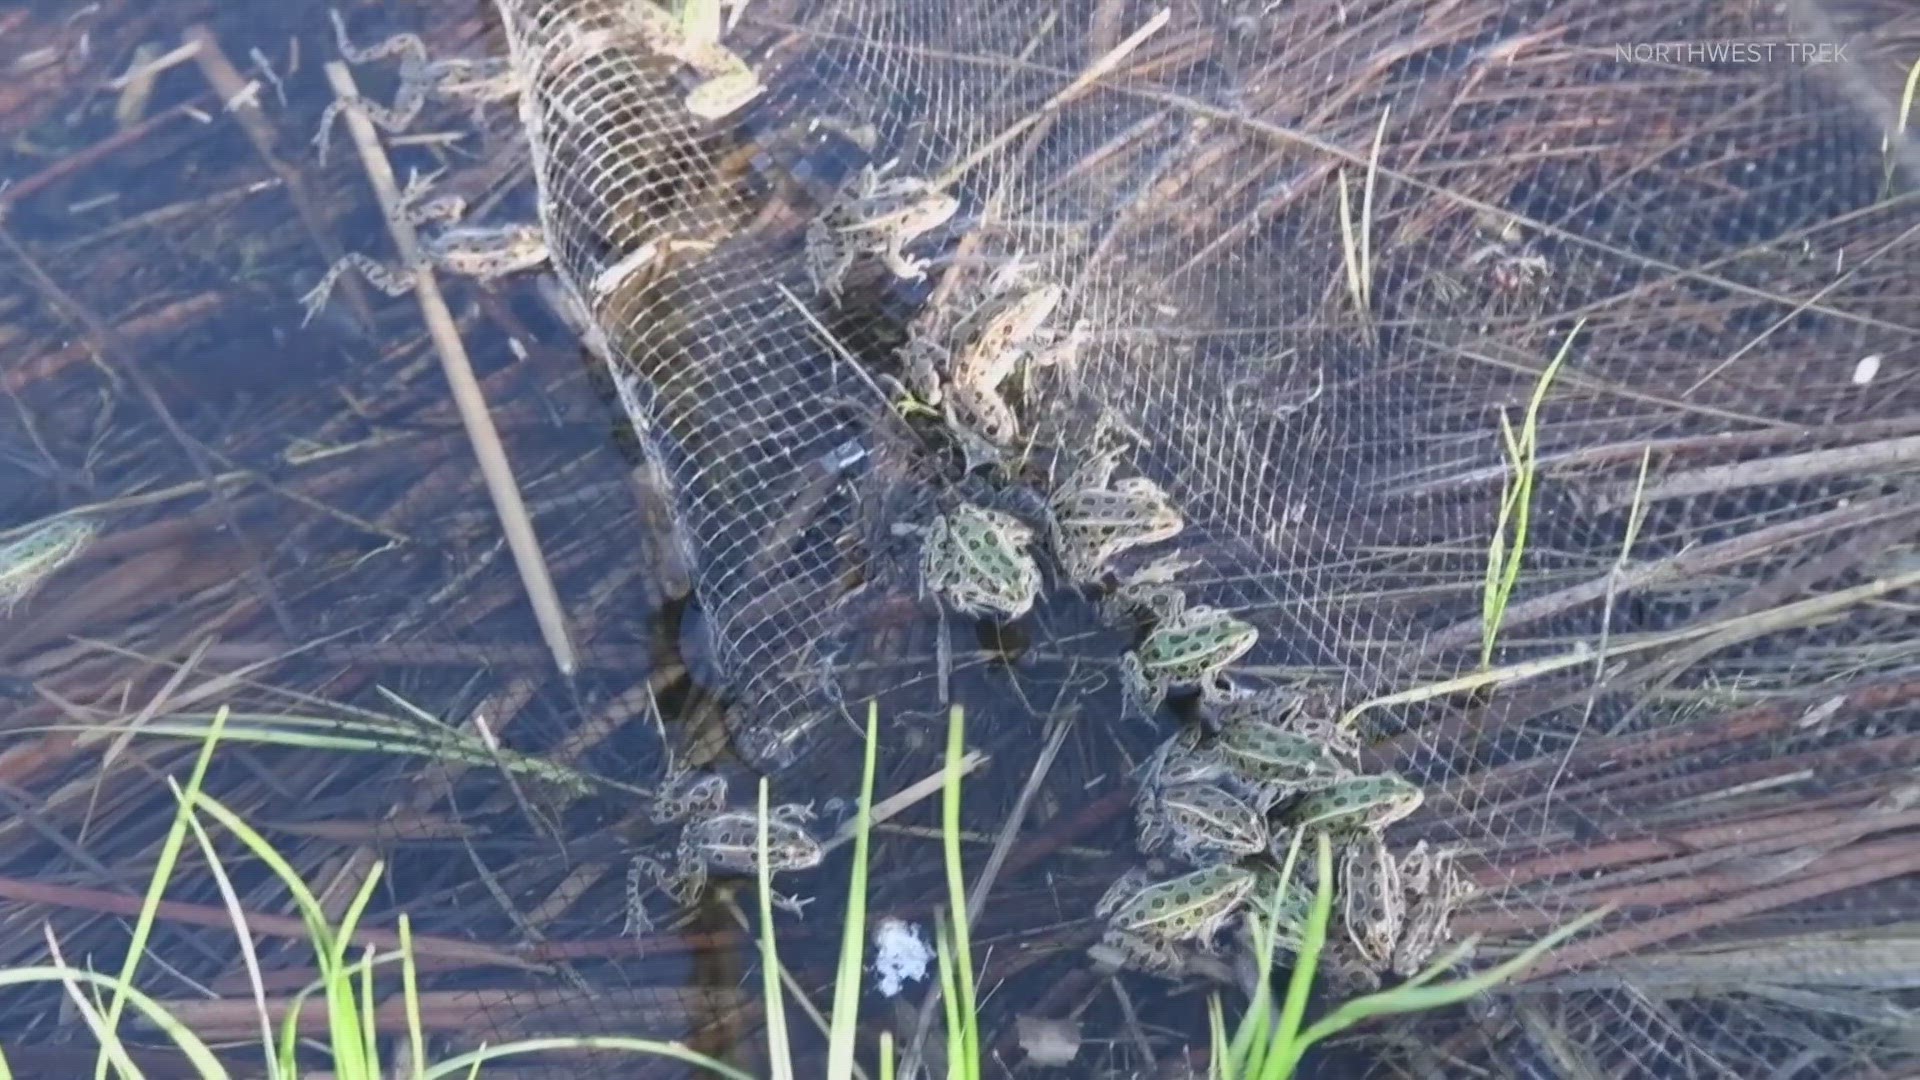 Several endangered northern leopard frogs were released at the Columbia National Wildlife Refuge. The frogs have been endangered in Washington since 1999.